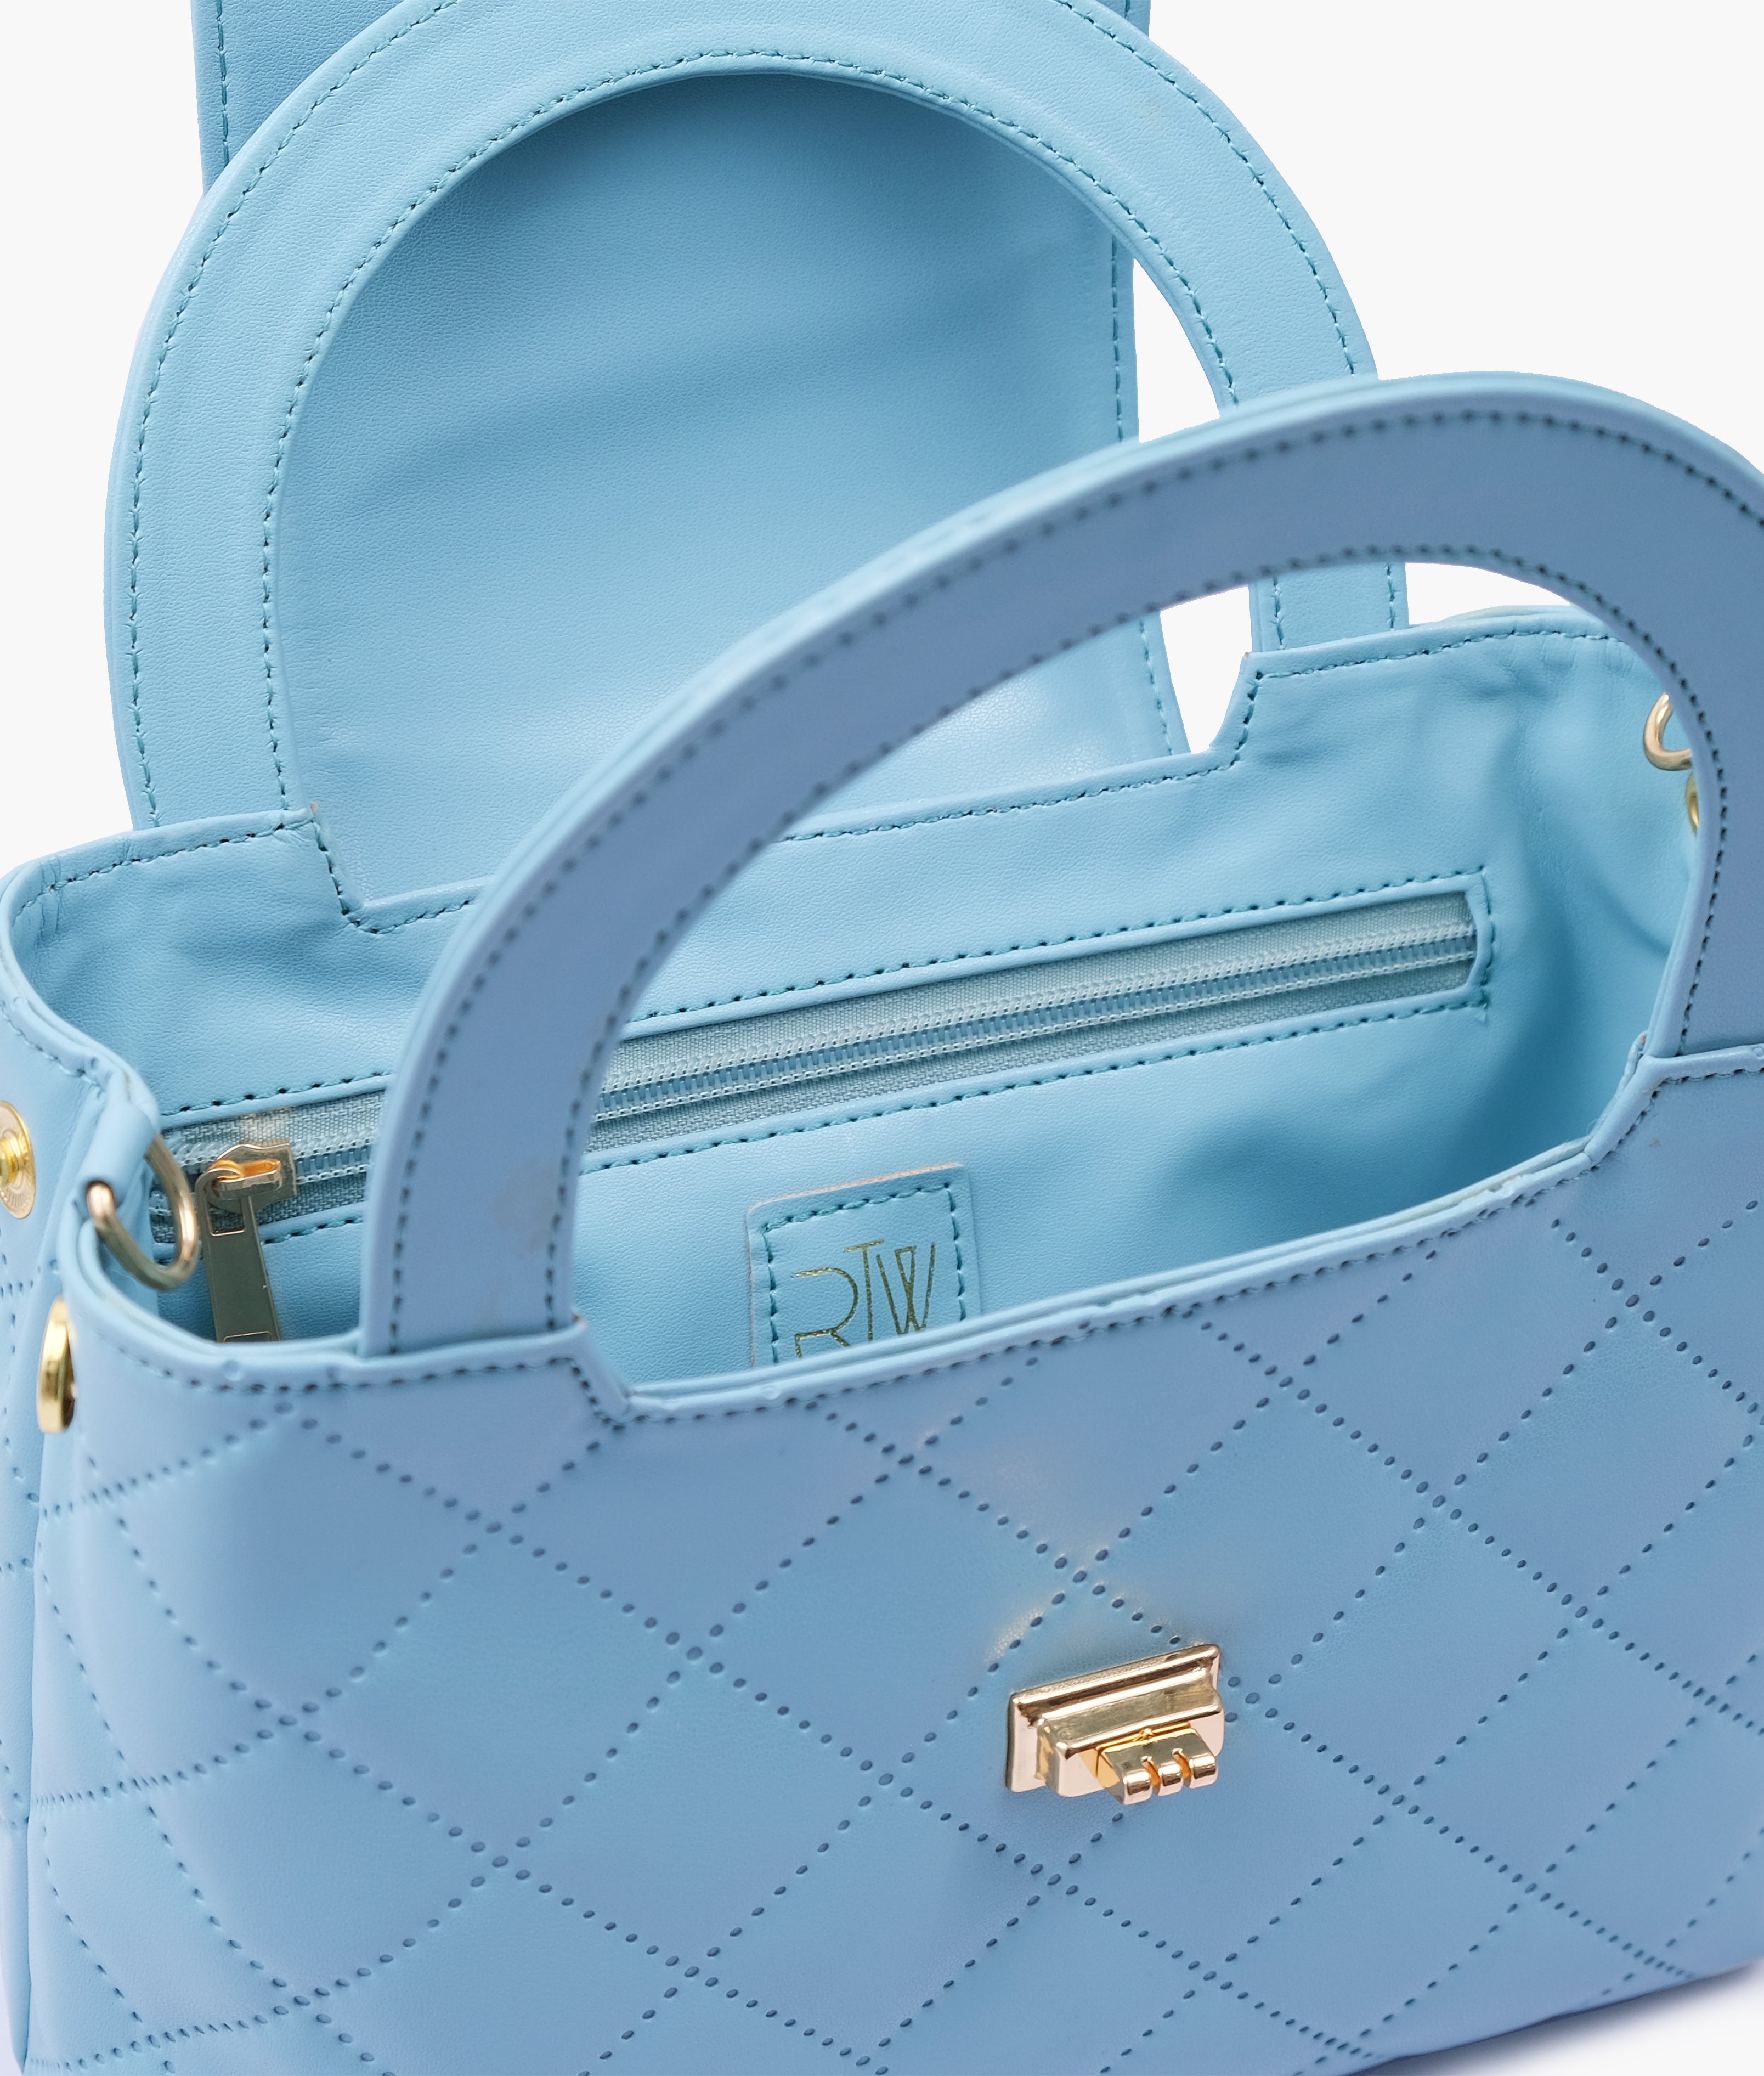 Sky blue flap quilted bag with top handle